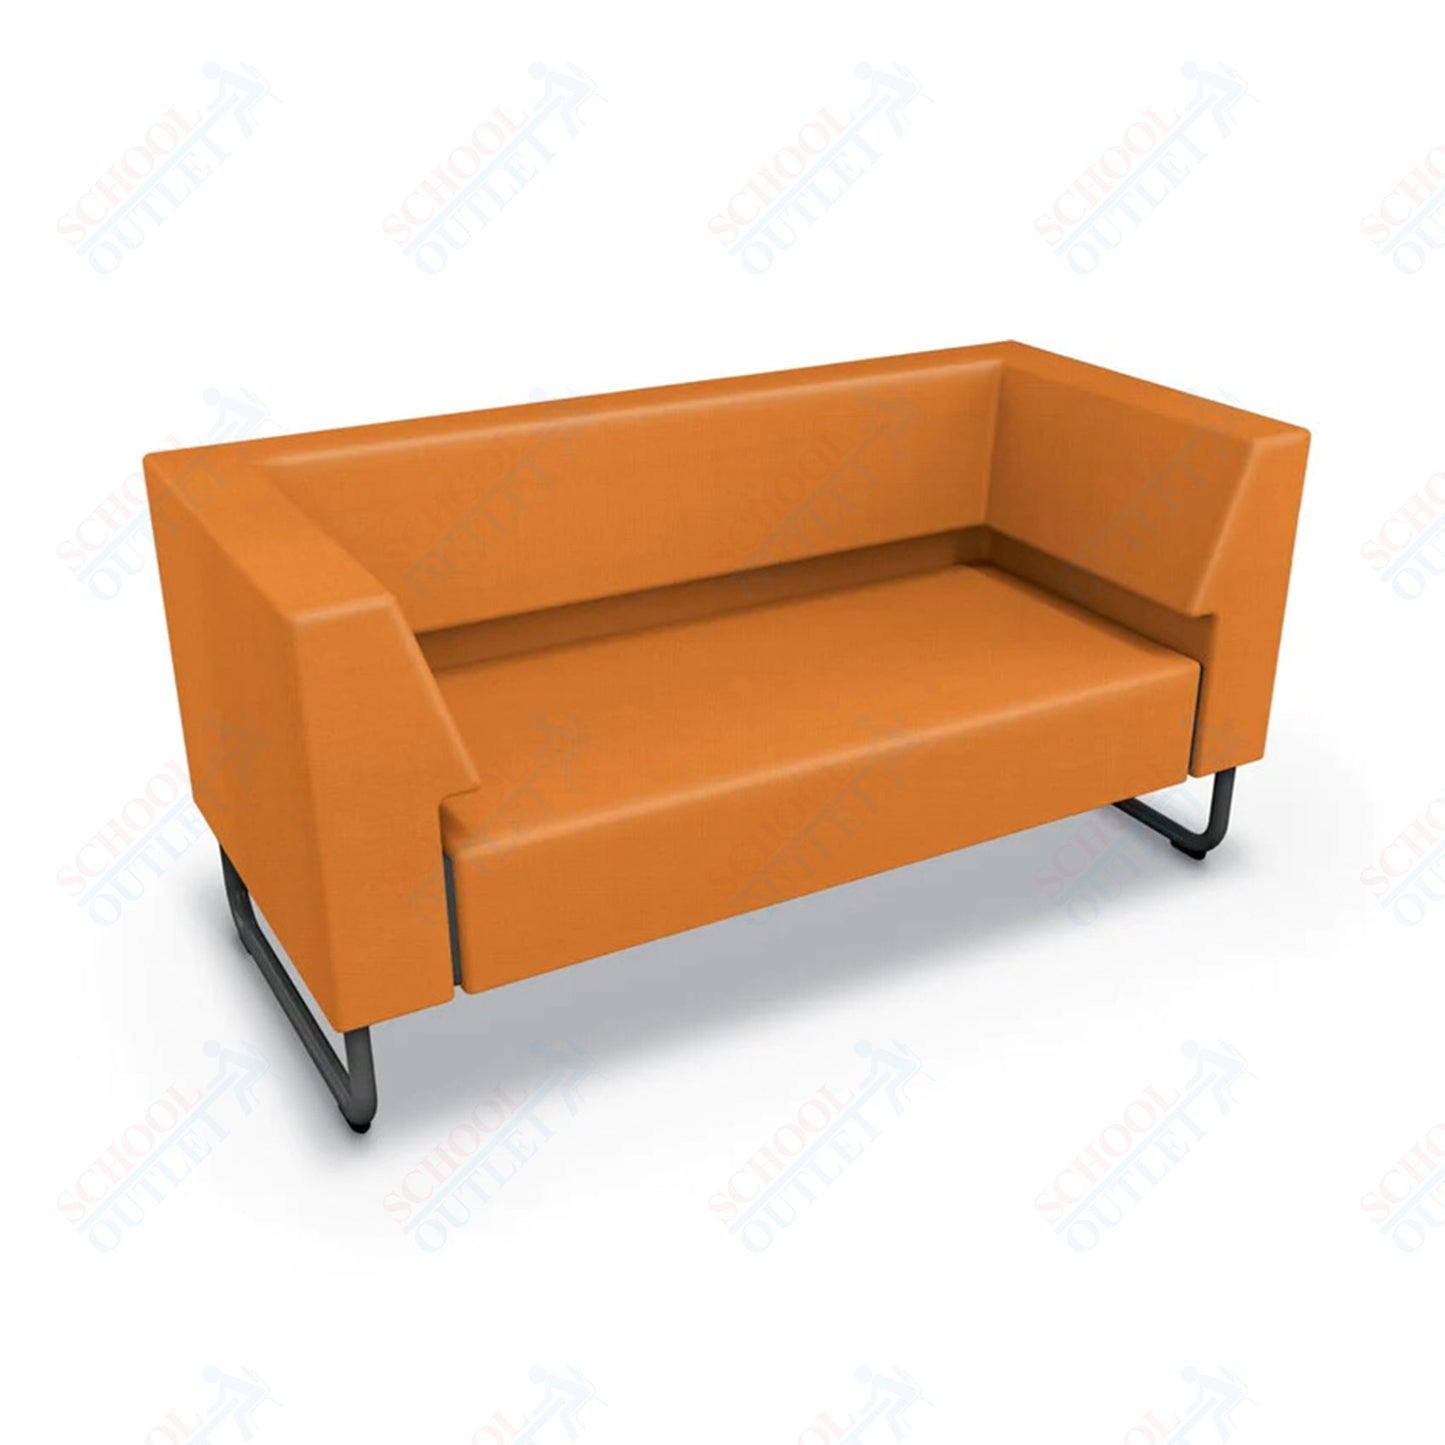 Mooreco Akt Soft Seating Lounge Loveseat - Both Arms - Grade 02 Fabric and Powder Coated Sled Legs